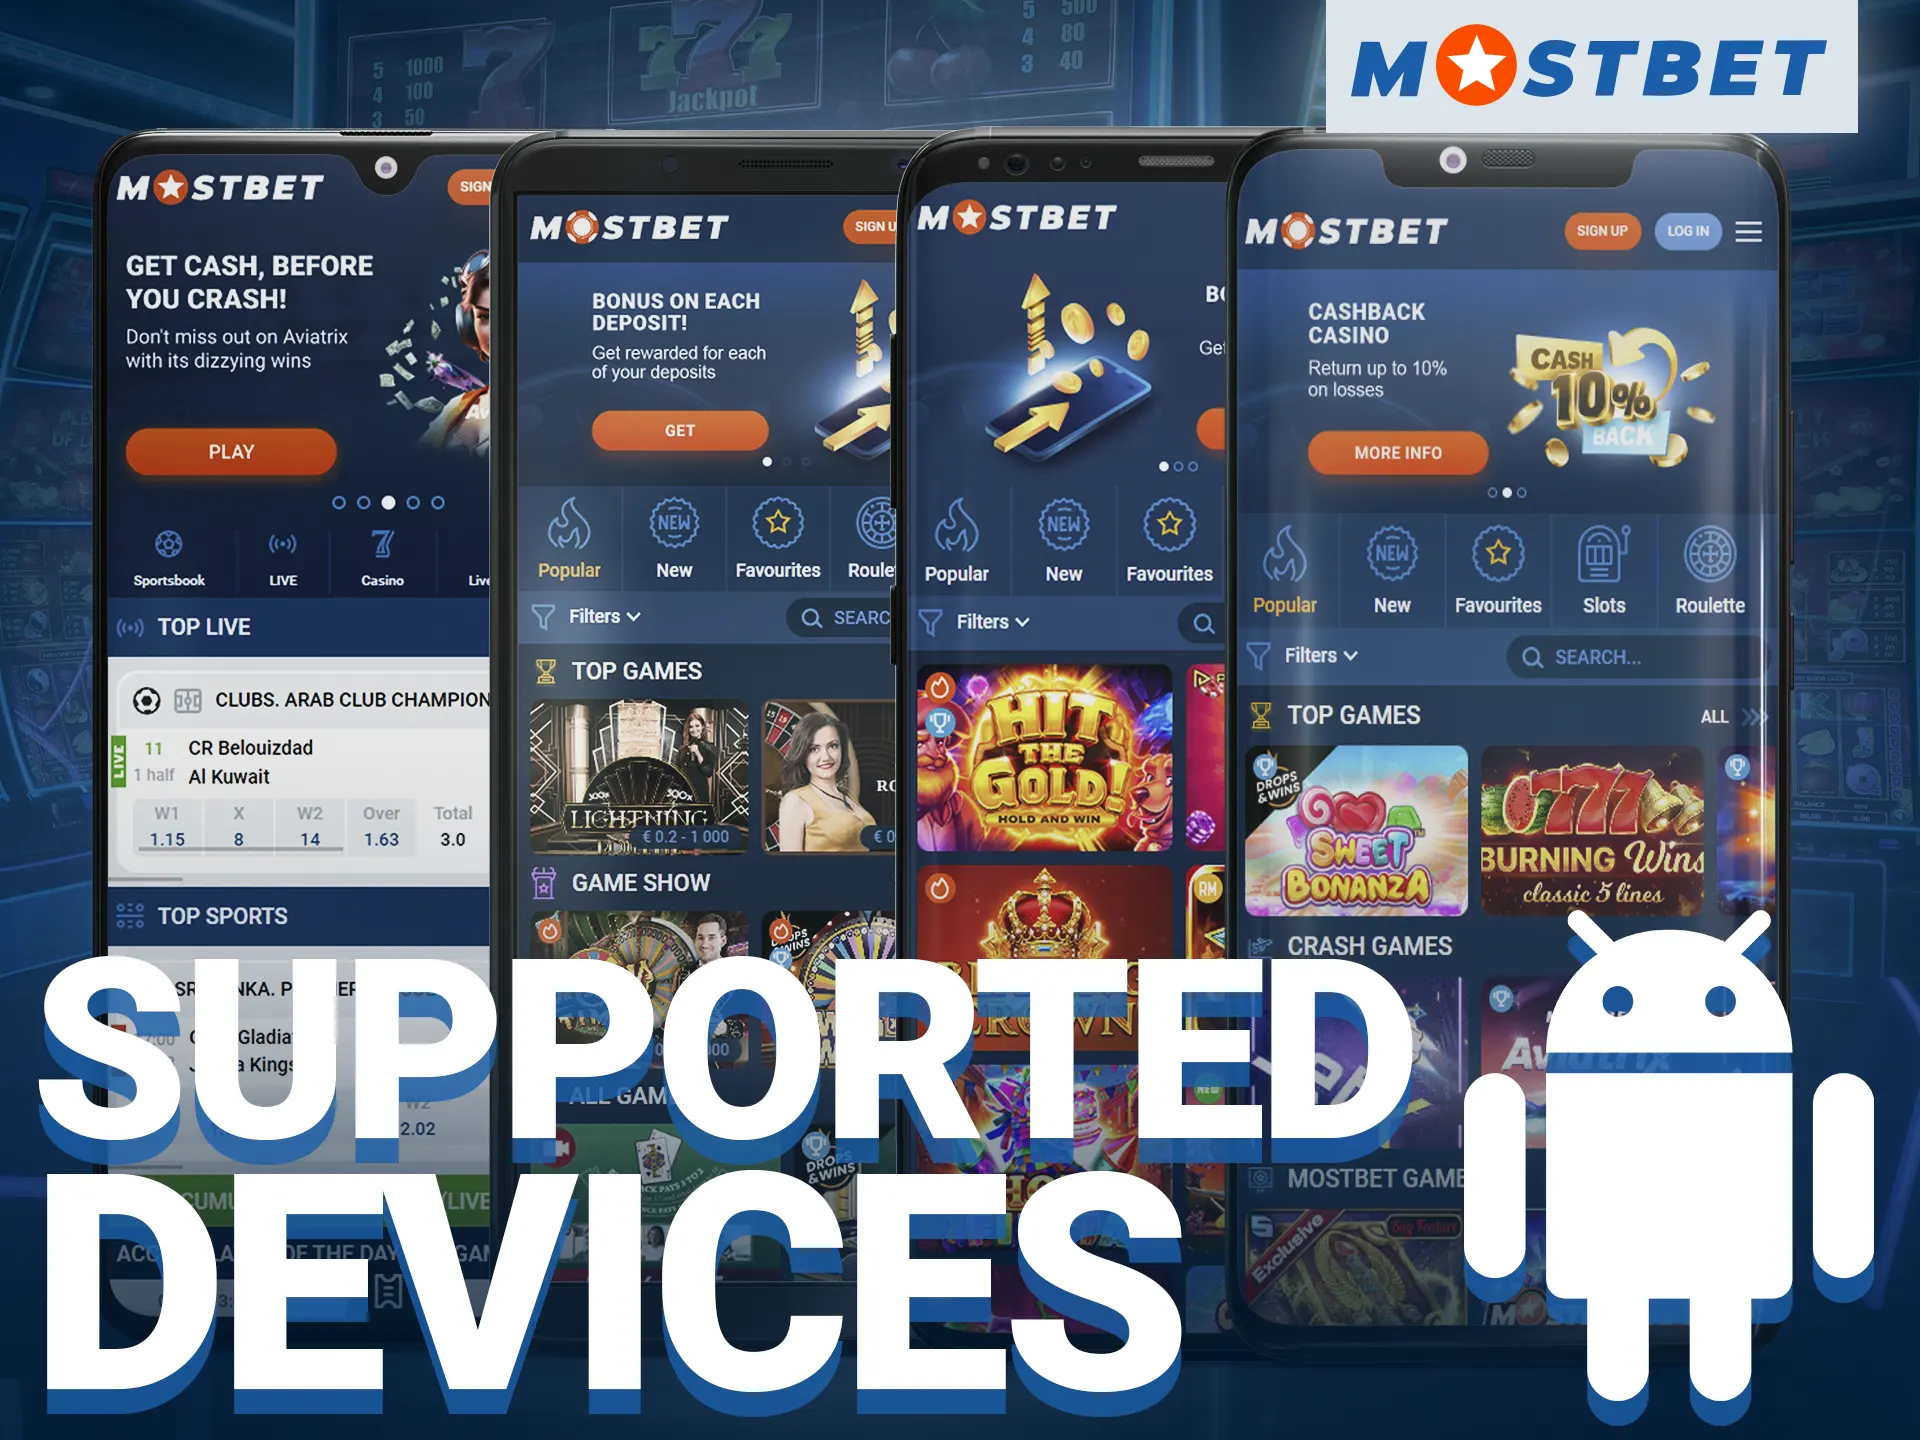 Download the Mostbet app to your Android device.